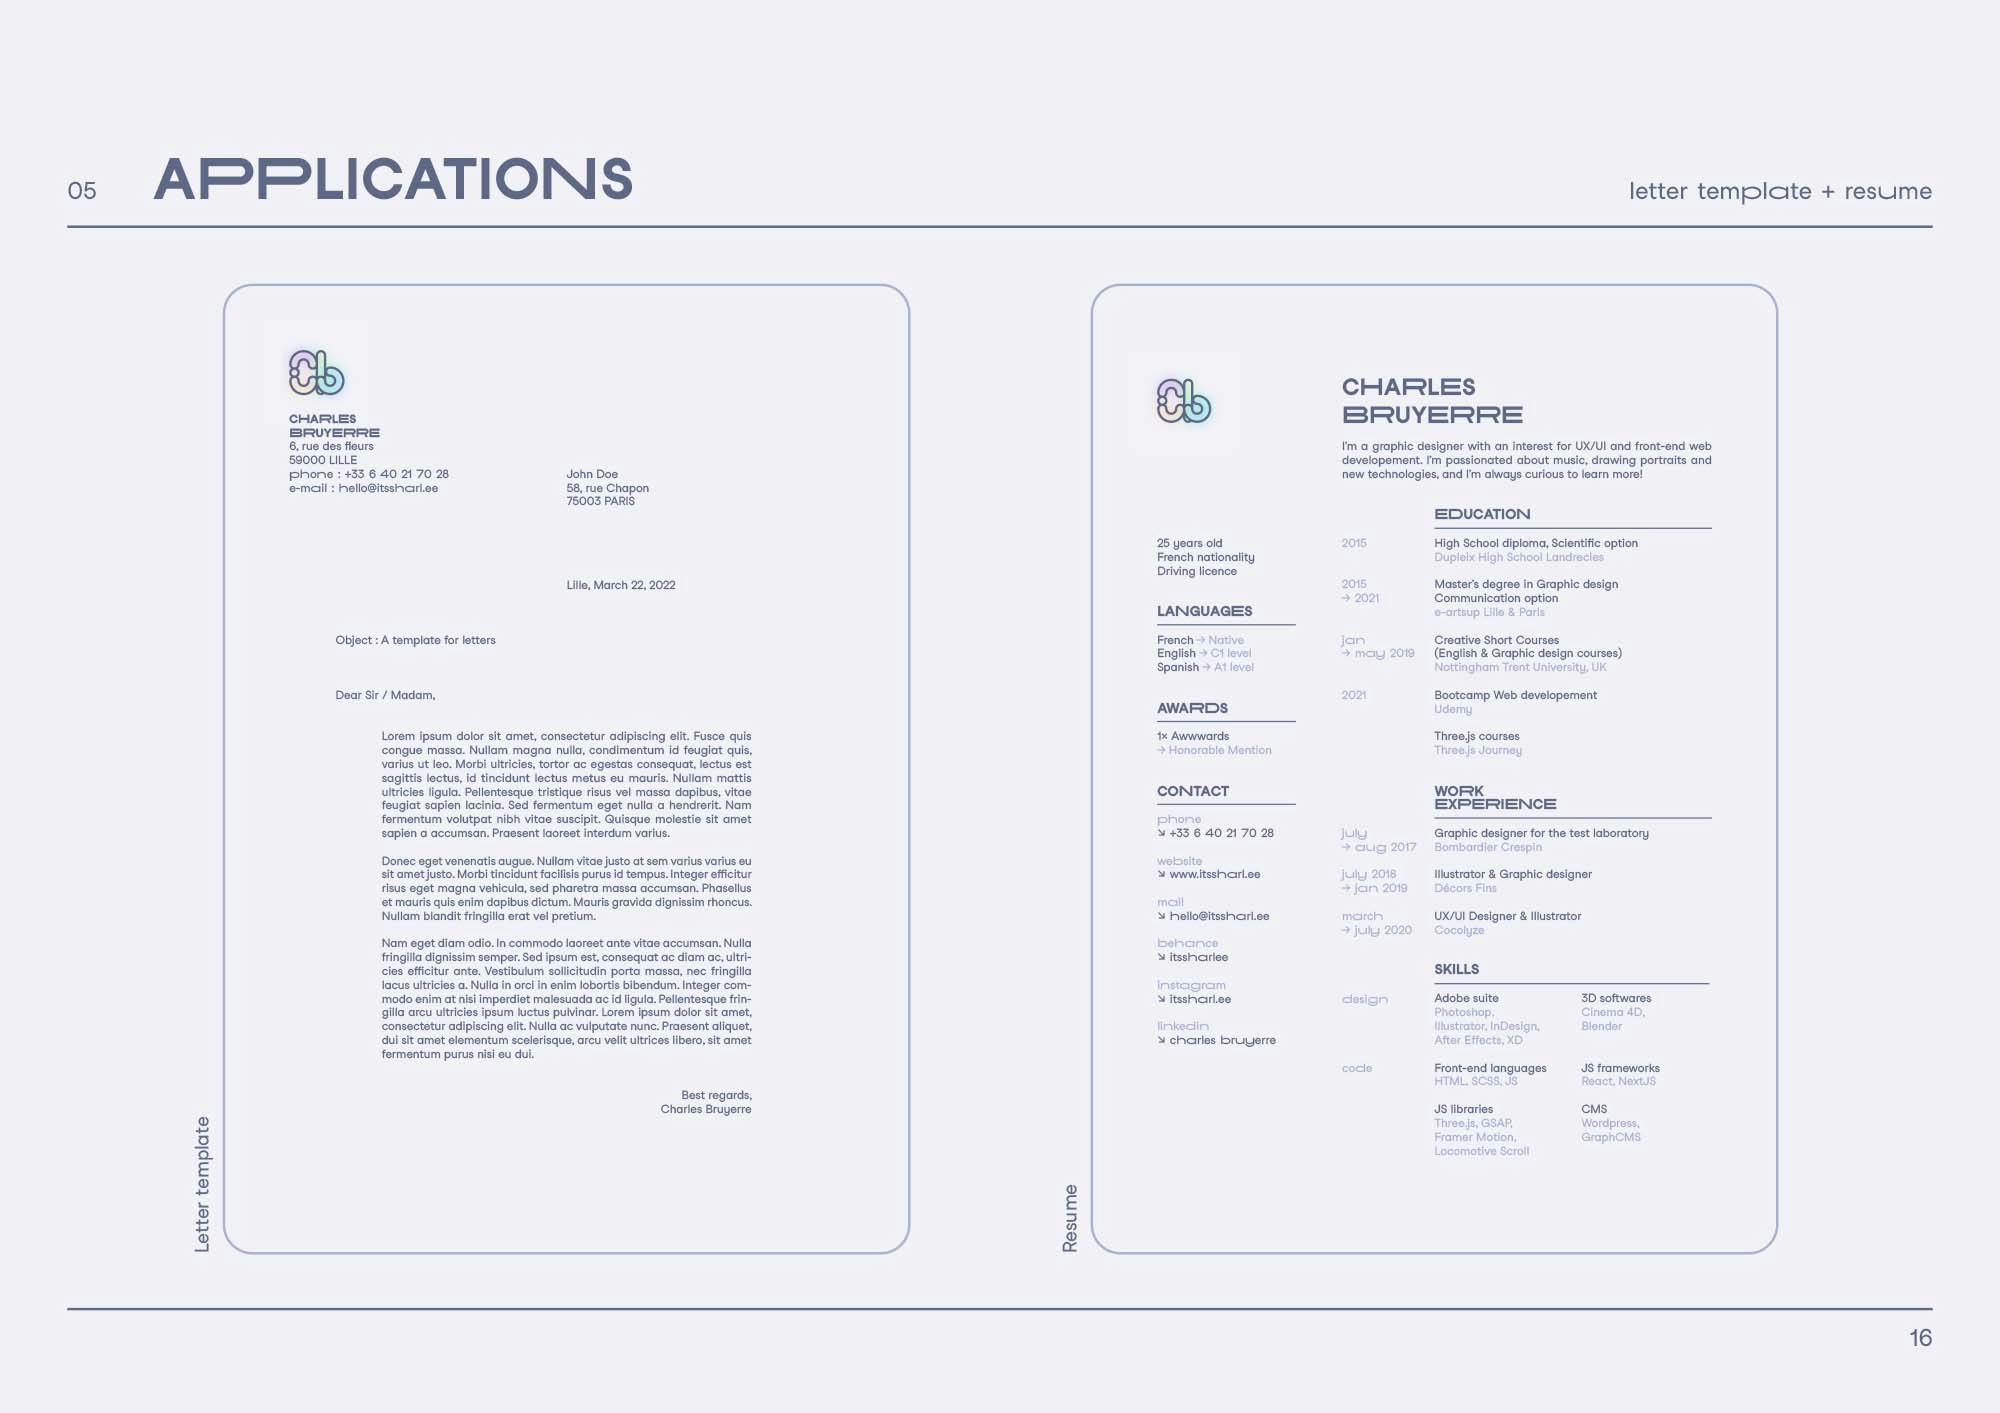 Brand guidelines (Applications)